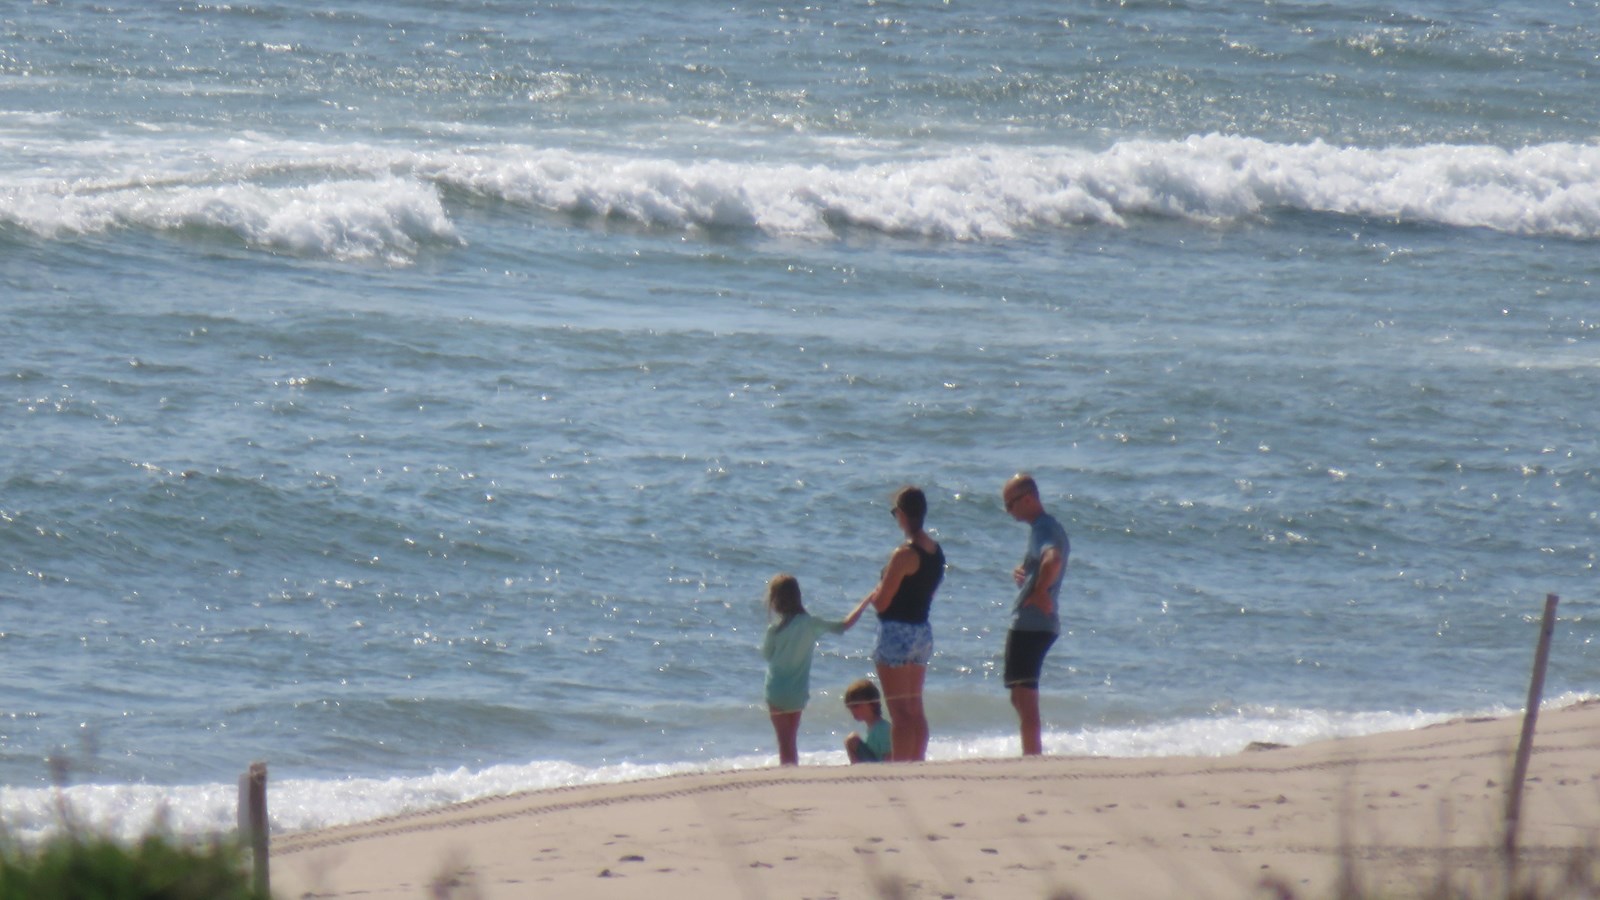 A man, woman, and two children stand together on the beach as the waves roll in.